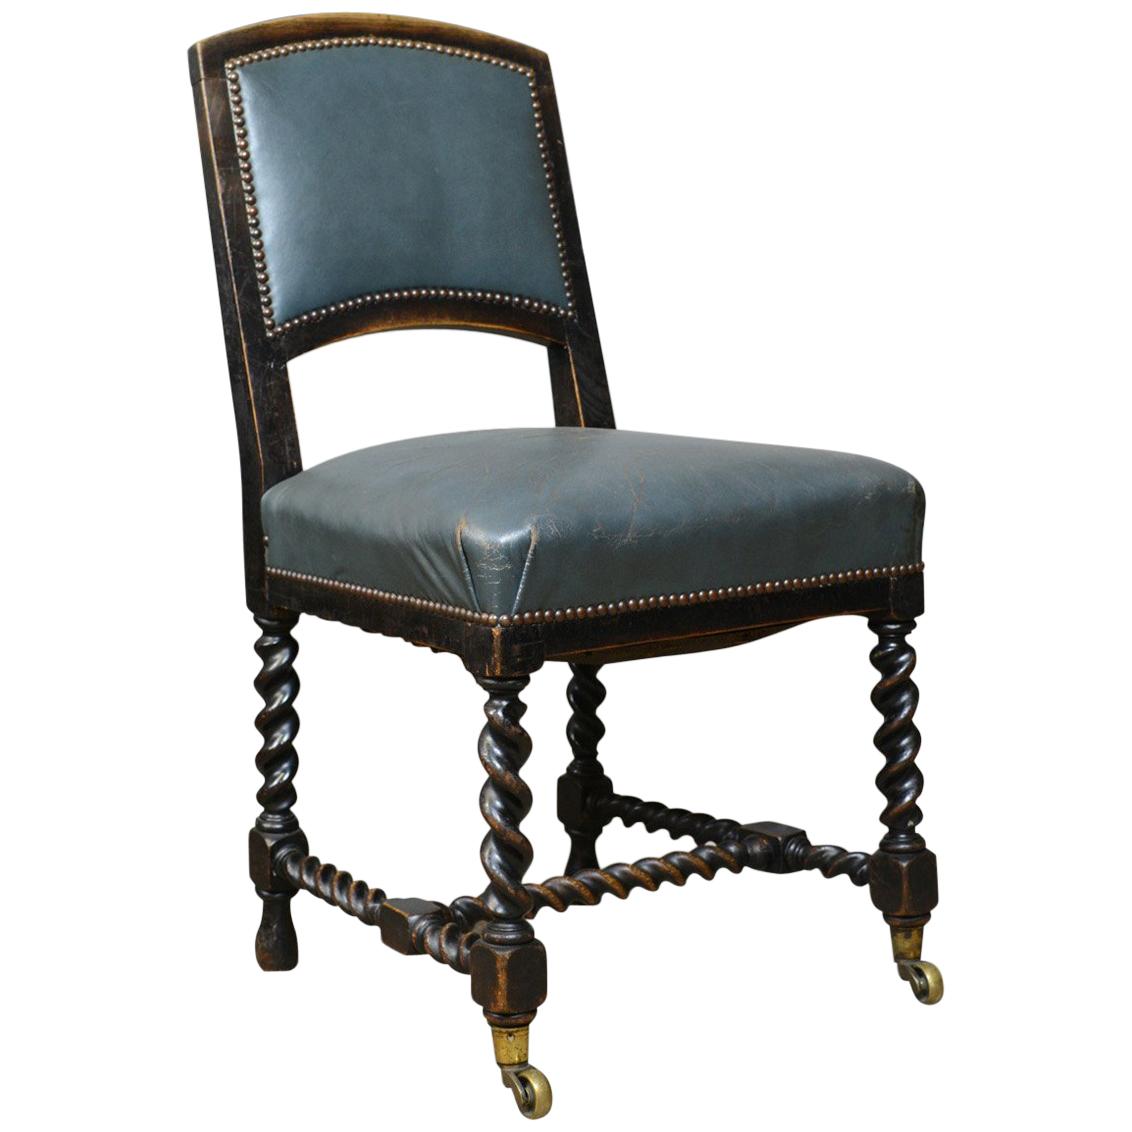 Set of Six Antique Dining Chairs, Oak, Leather, Aesthetic Movement, circa 1880